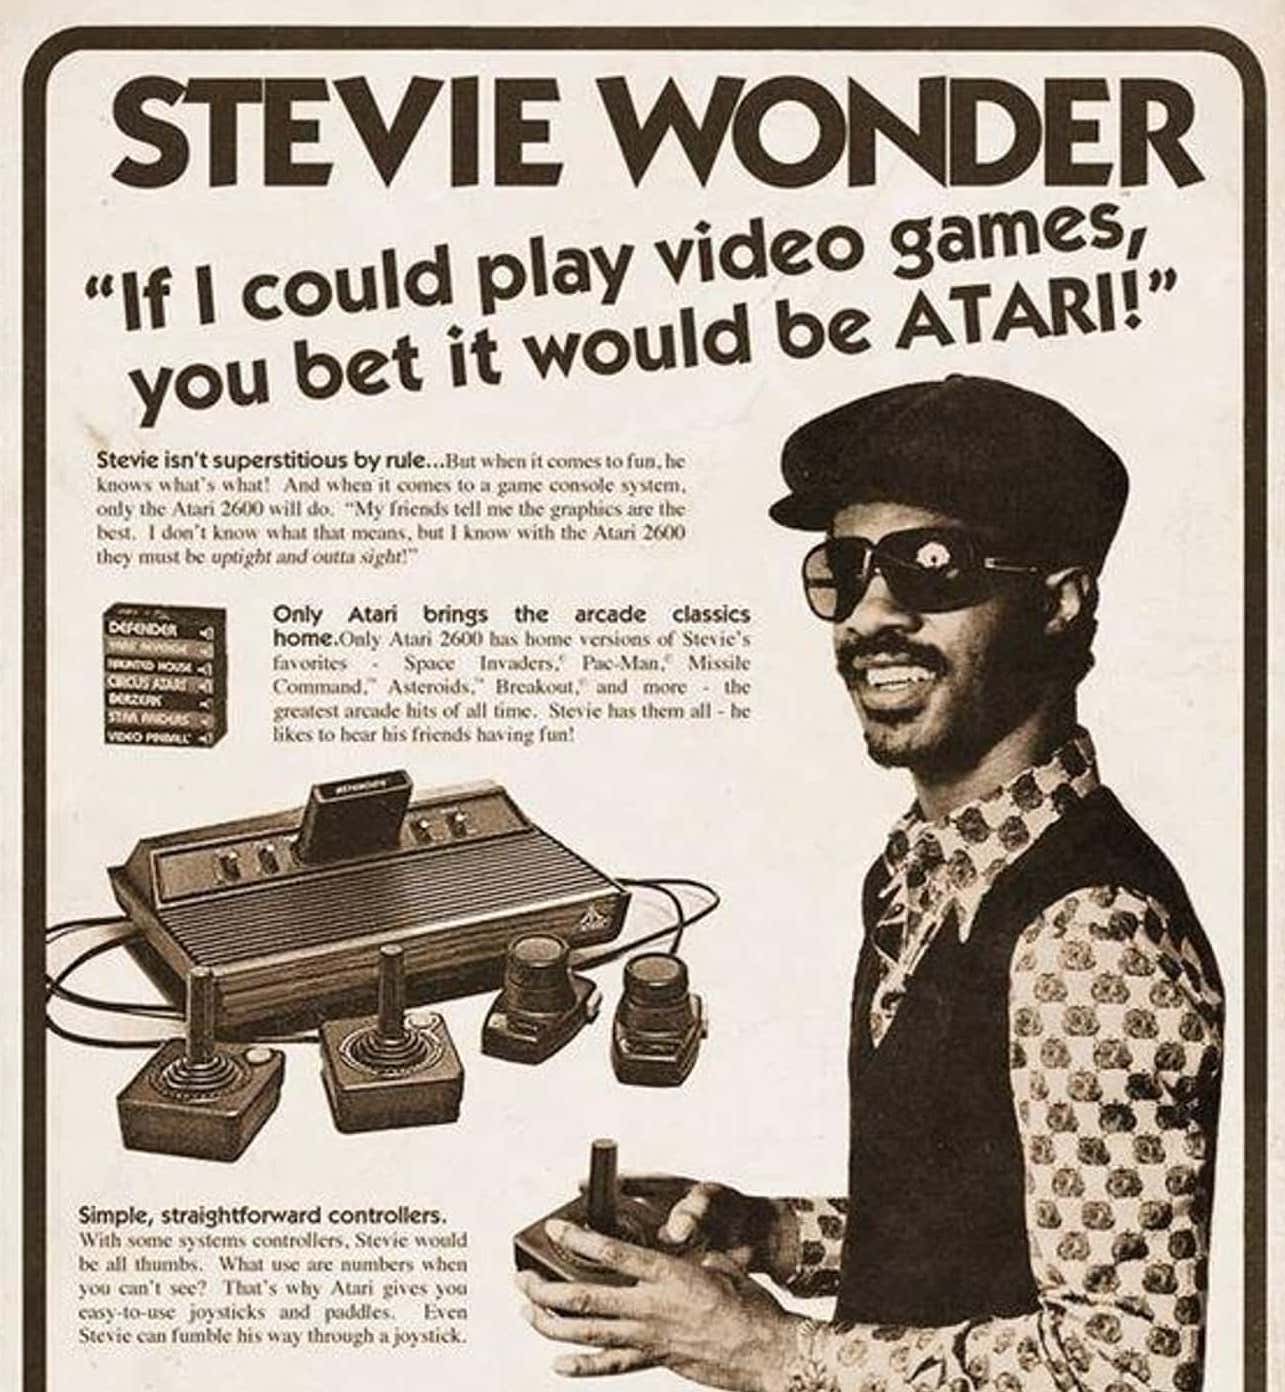 Vintage Gaming Ads - stevie wonder atari - Stevie Wonder "If I could play video games, you bet it would be Atari!" Stevie isn't superstitious by rule...But when it comes to fun, he knows what's what! And when it comes to a game console system. only the At